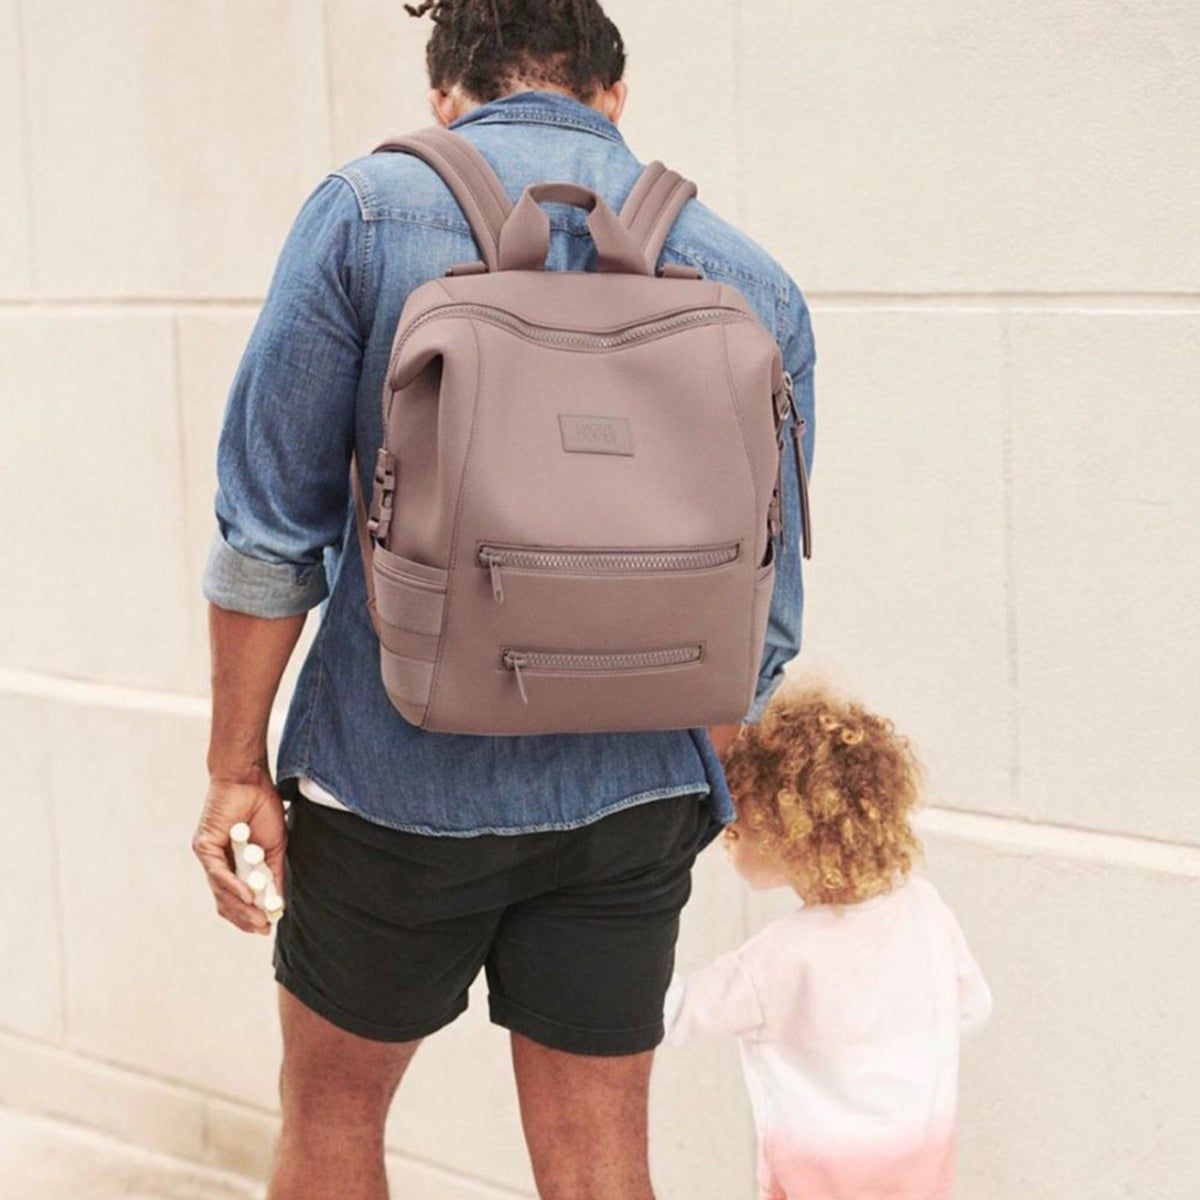 A man wearing a back-pack and holding a child's hand